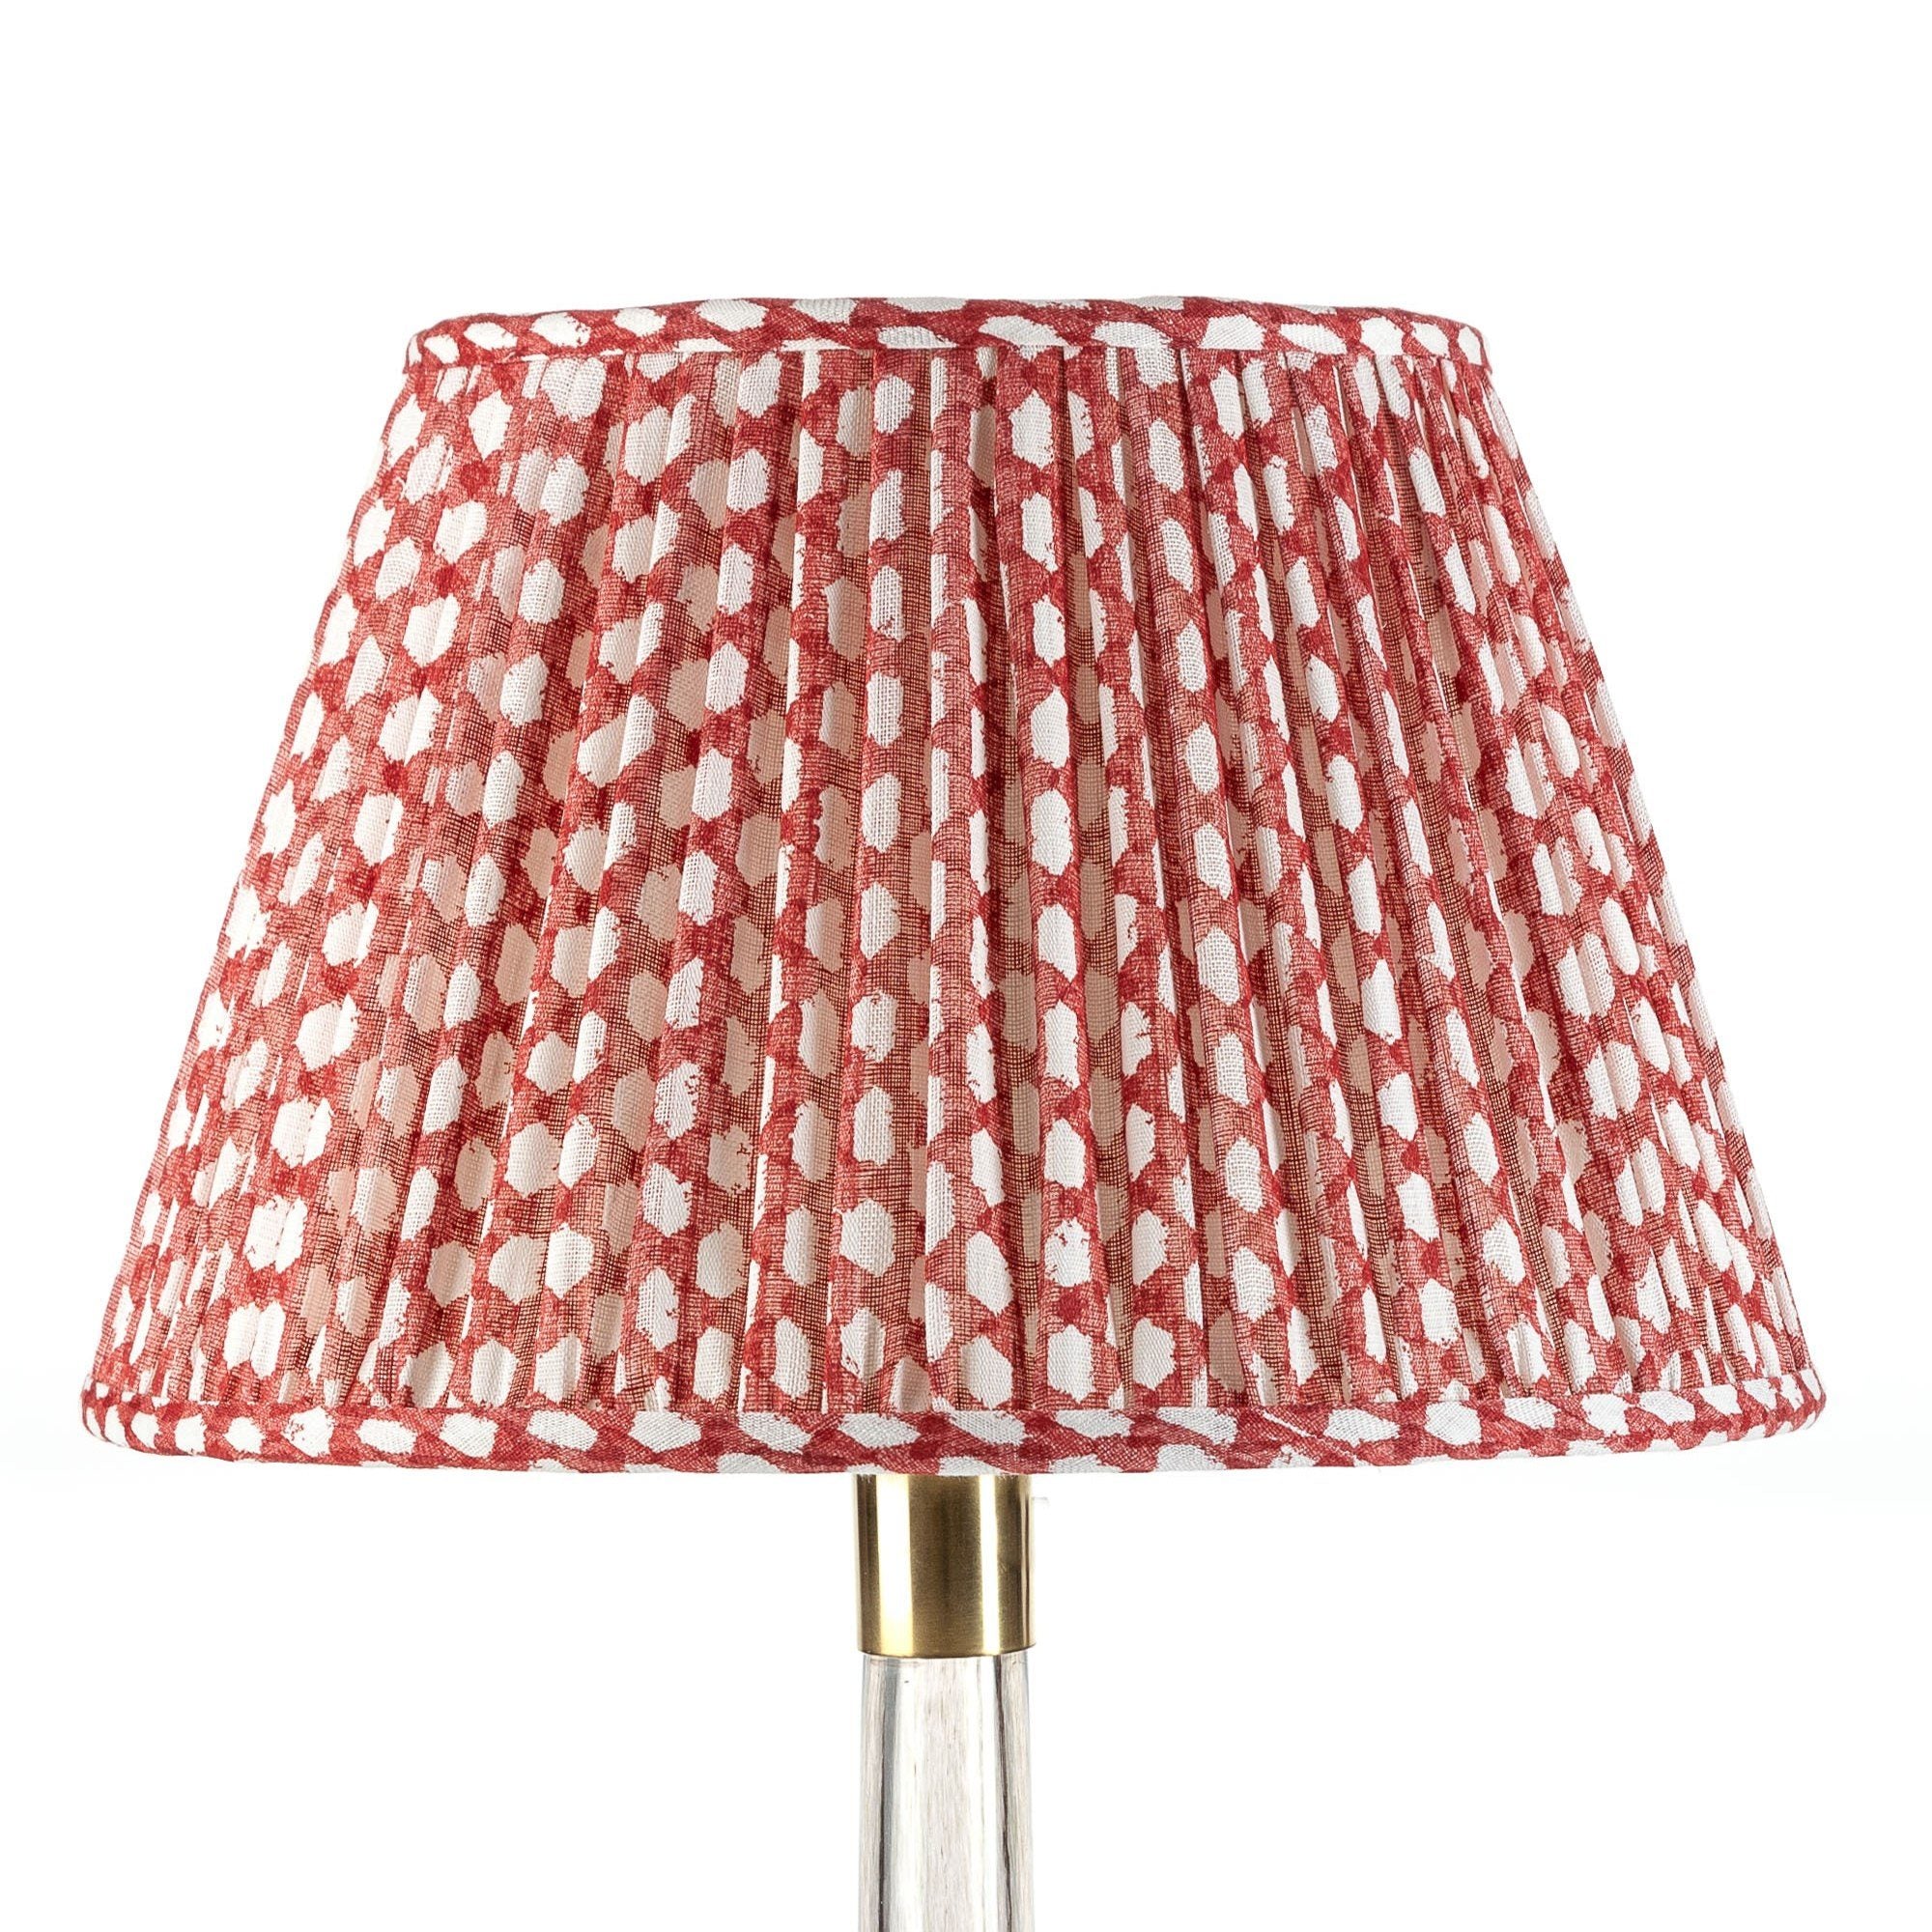 Wicker Red Linen Lampshade